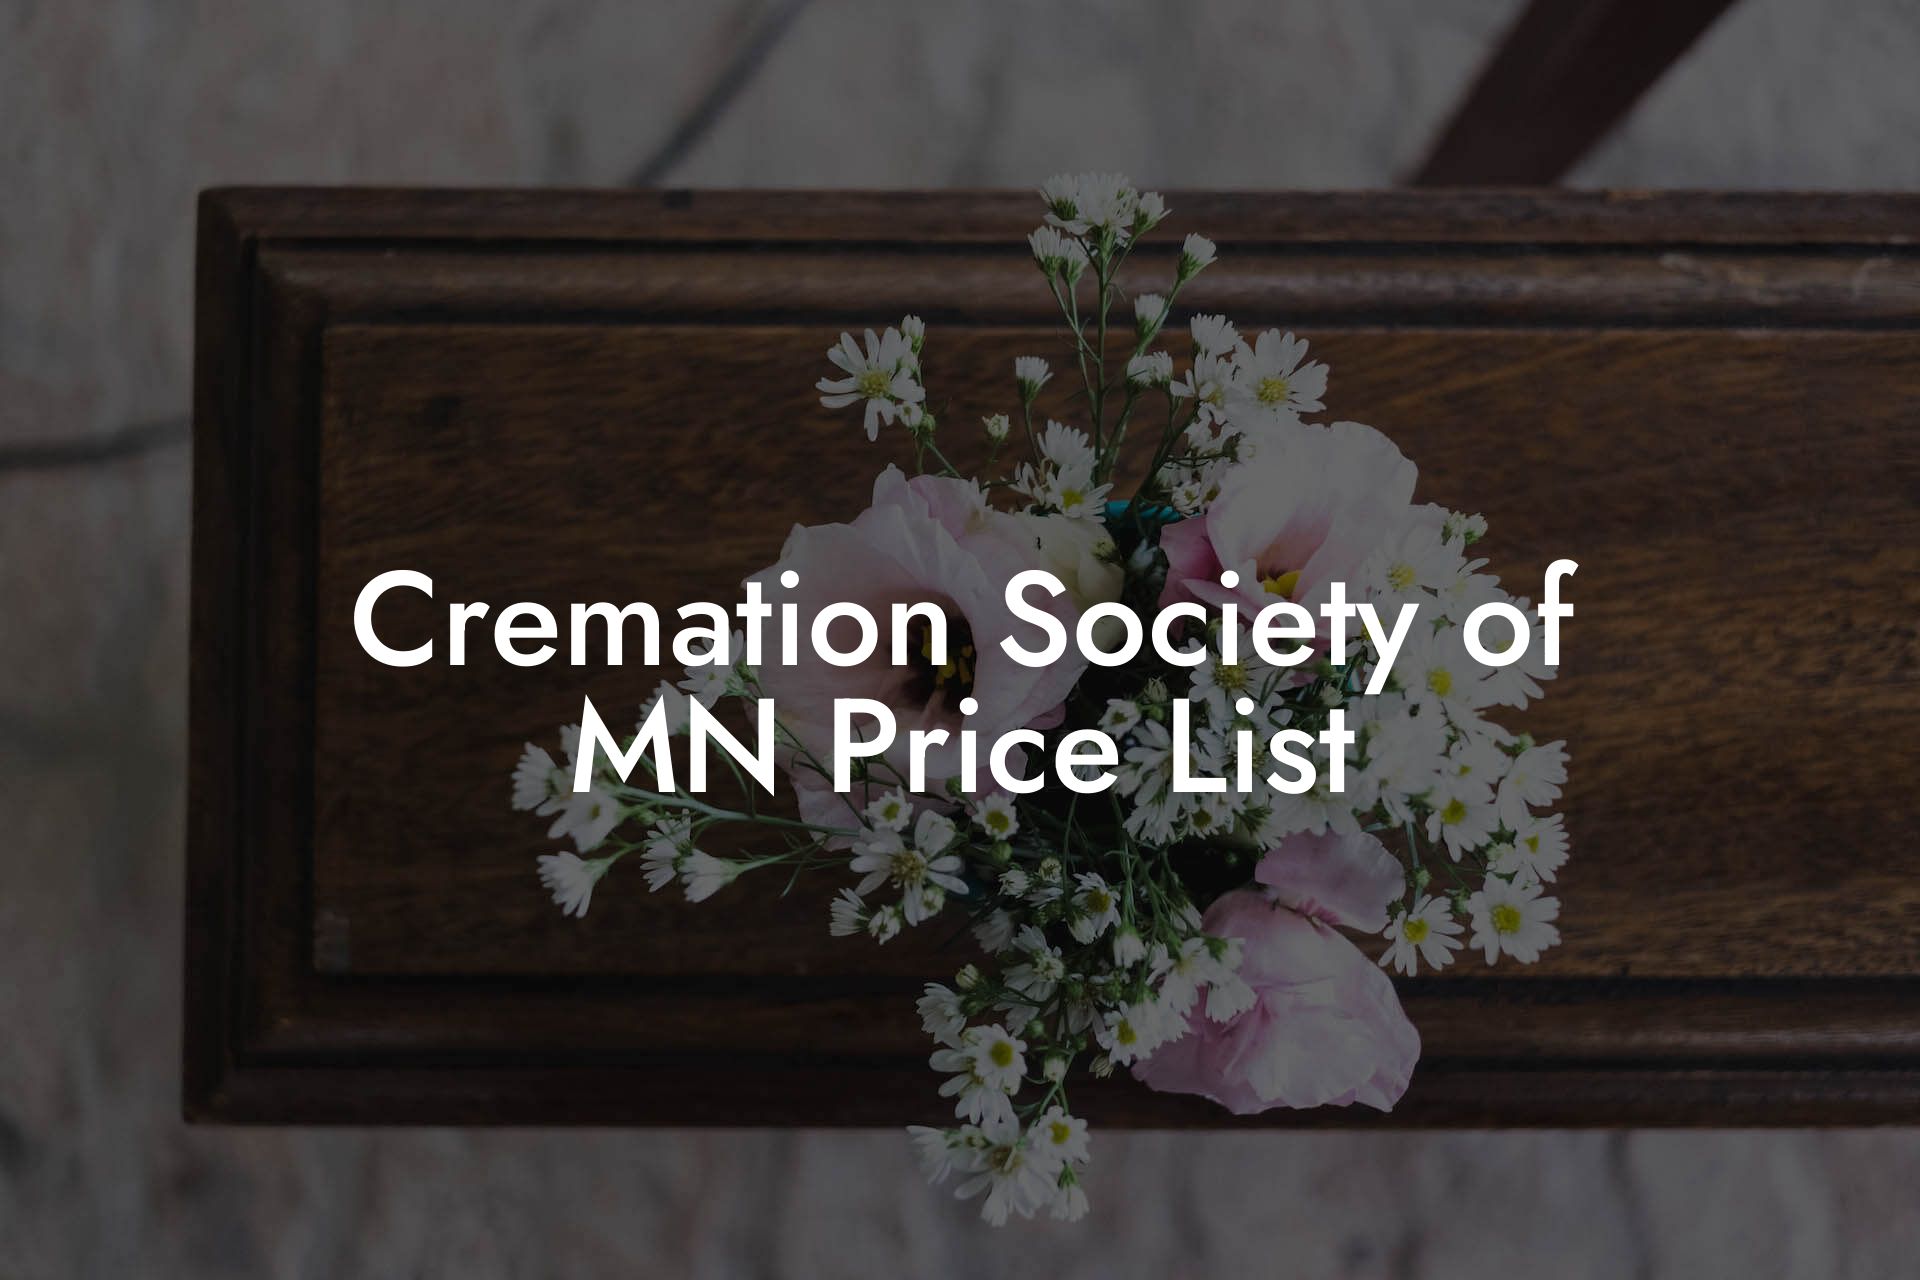 Cremation Society of MN Price List